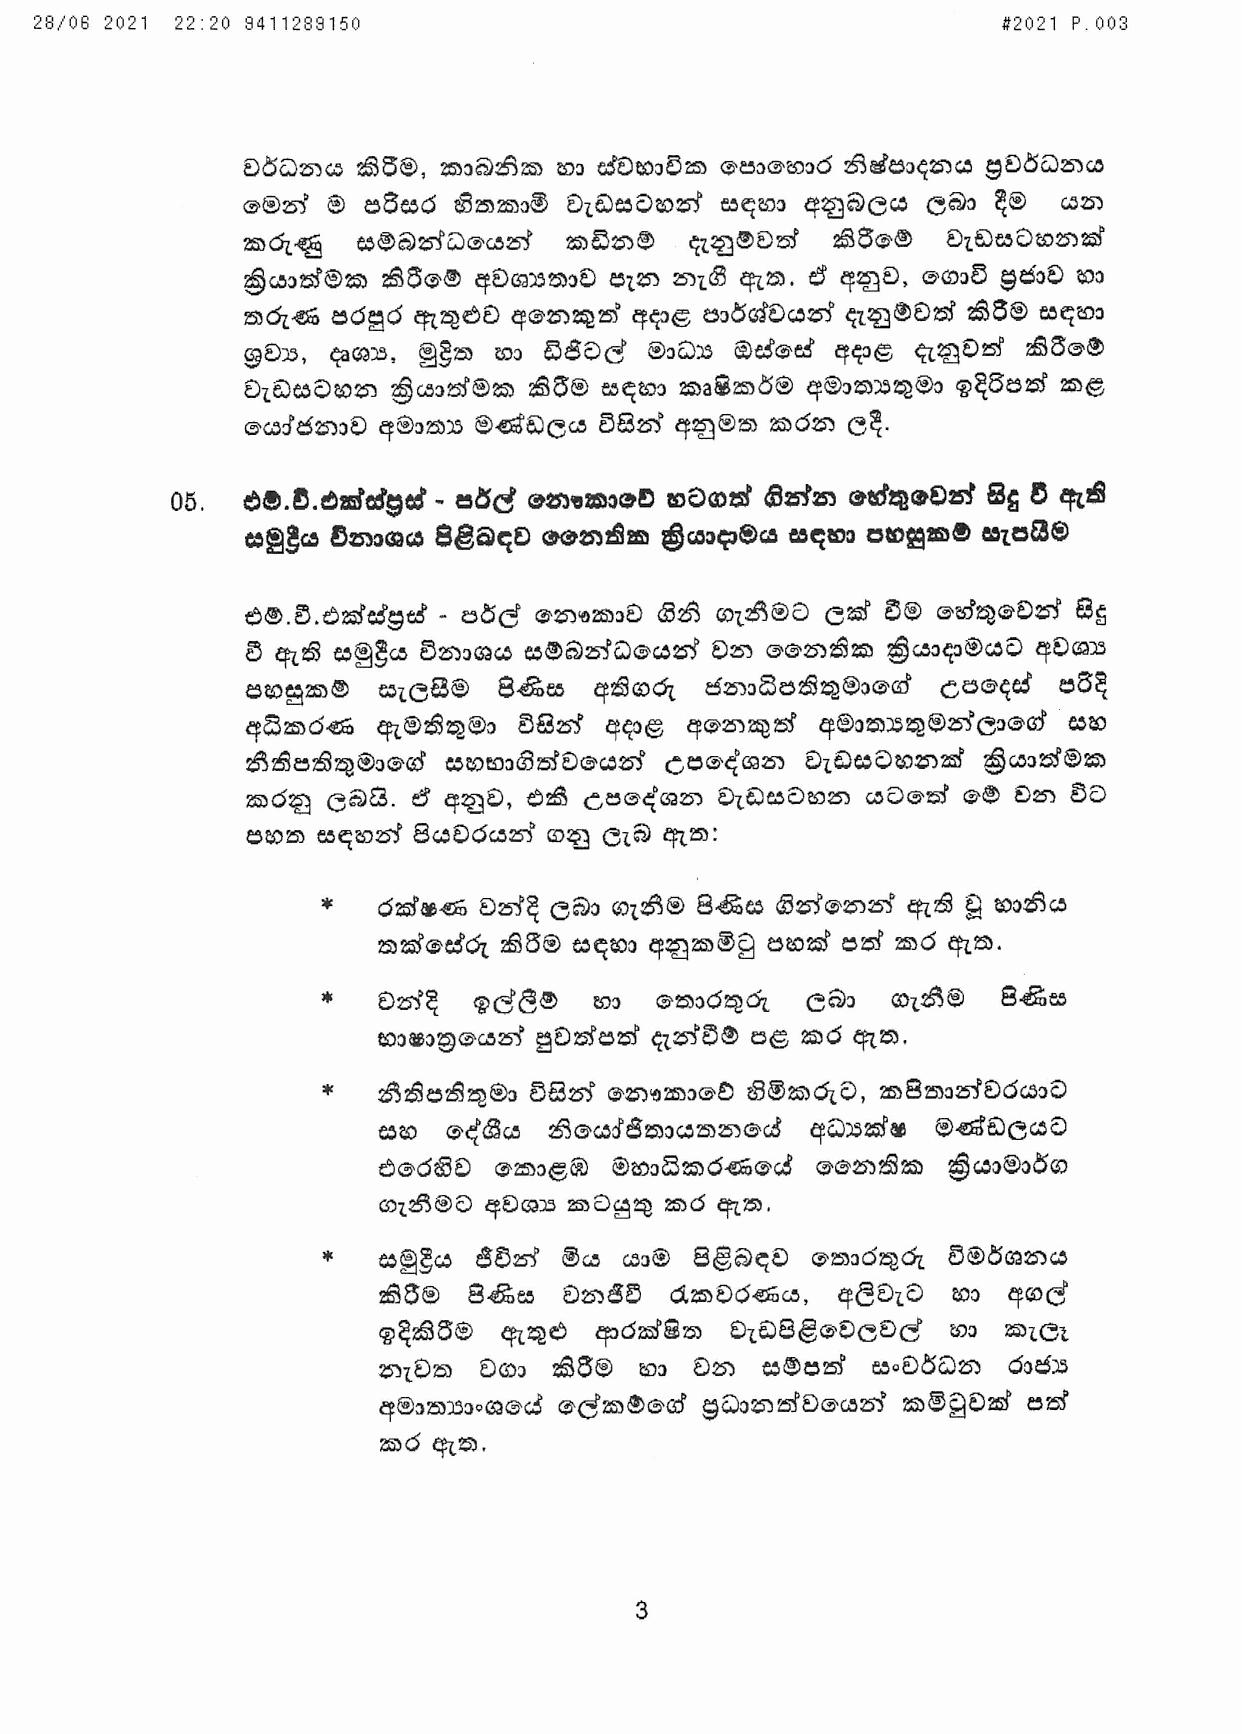 Cabinet Decision on 28.06.2021 page 003